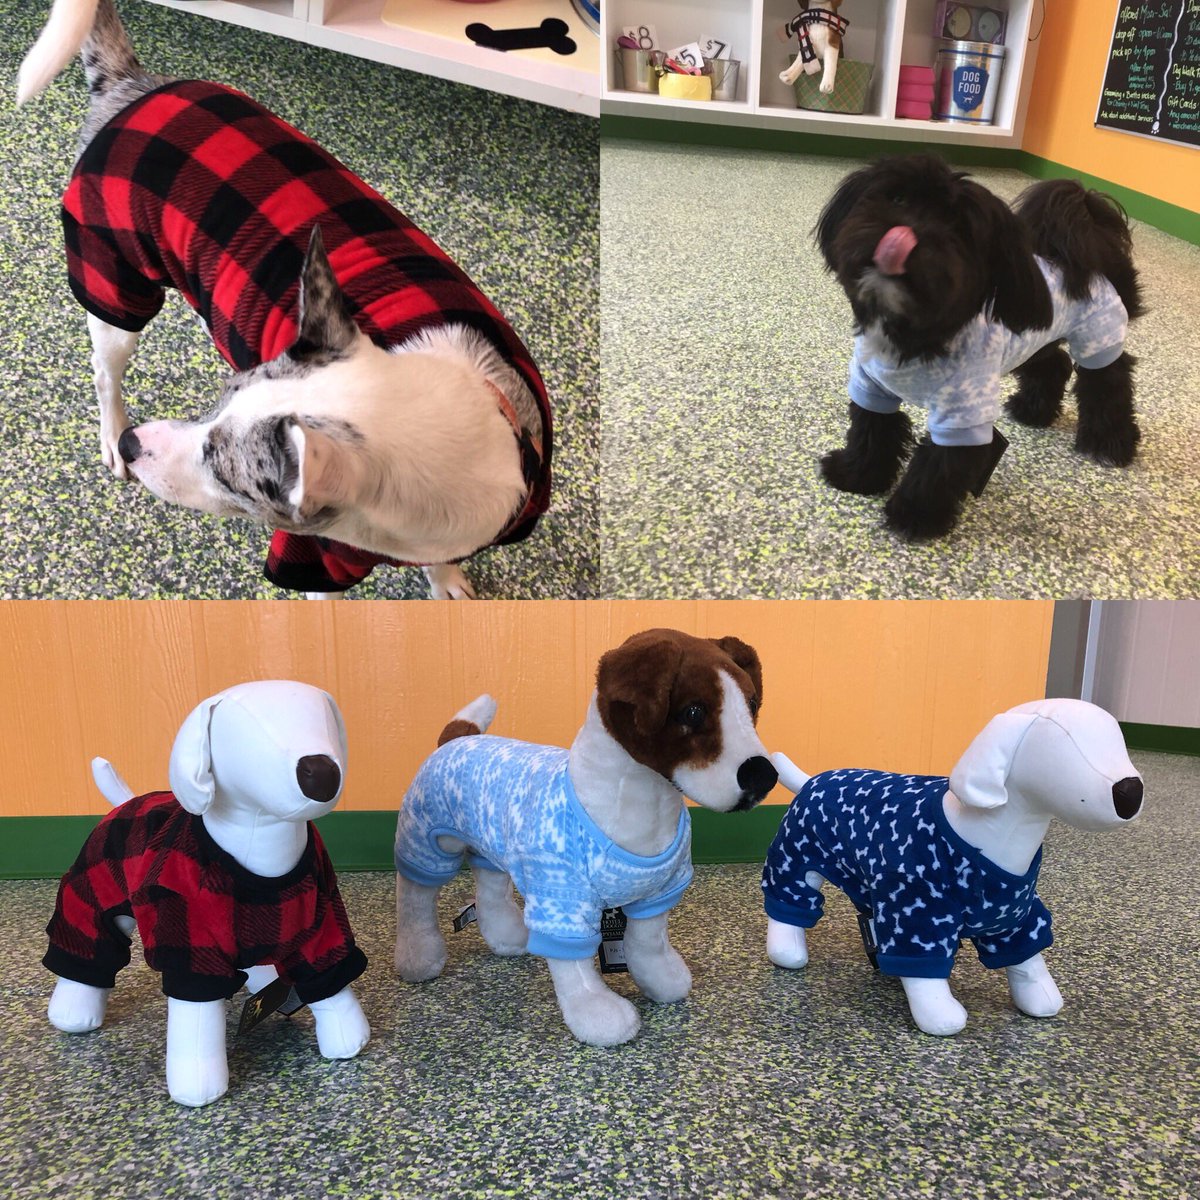 Zeus Place On Twitter Puppy Pajama Party Checkout These Cute